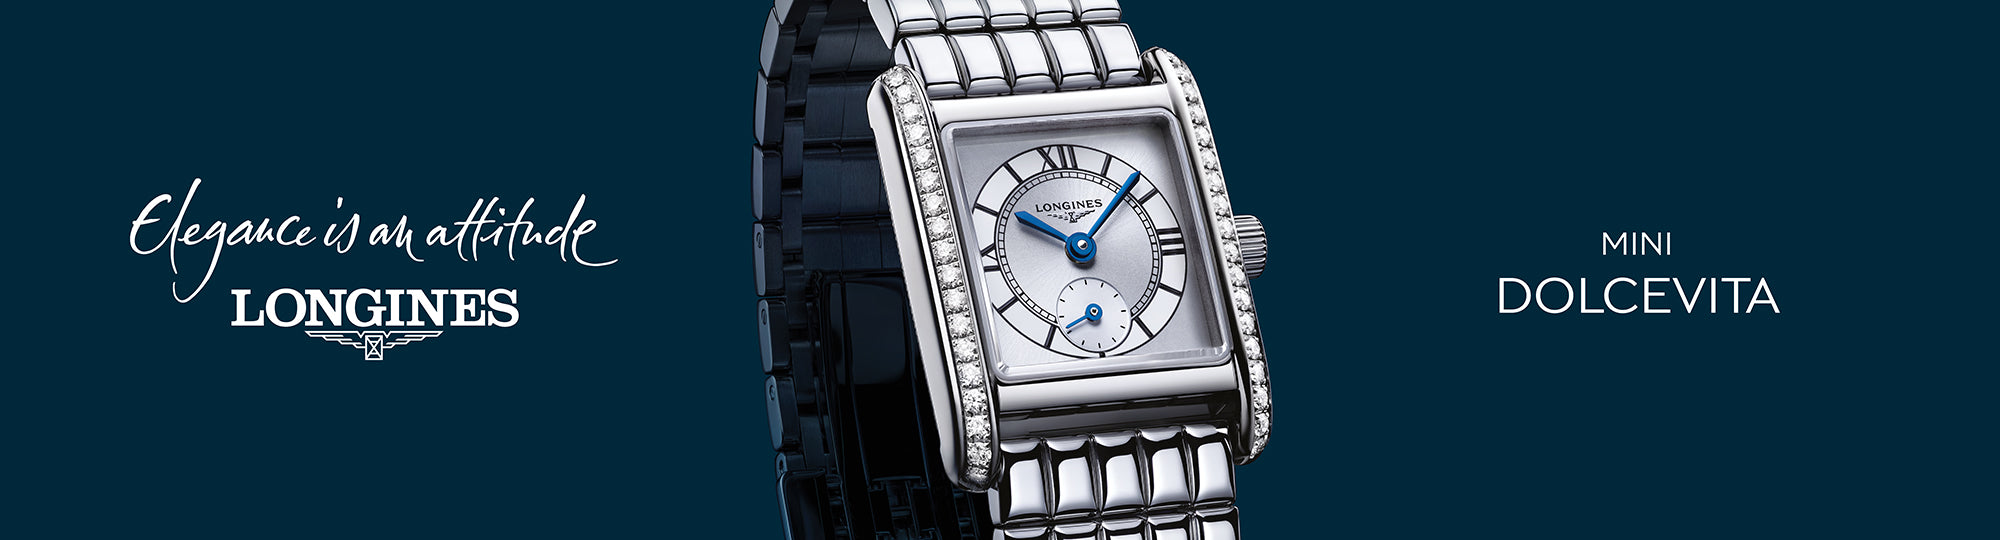 Longines watches available at Manfredi Jewels